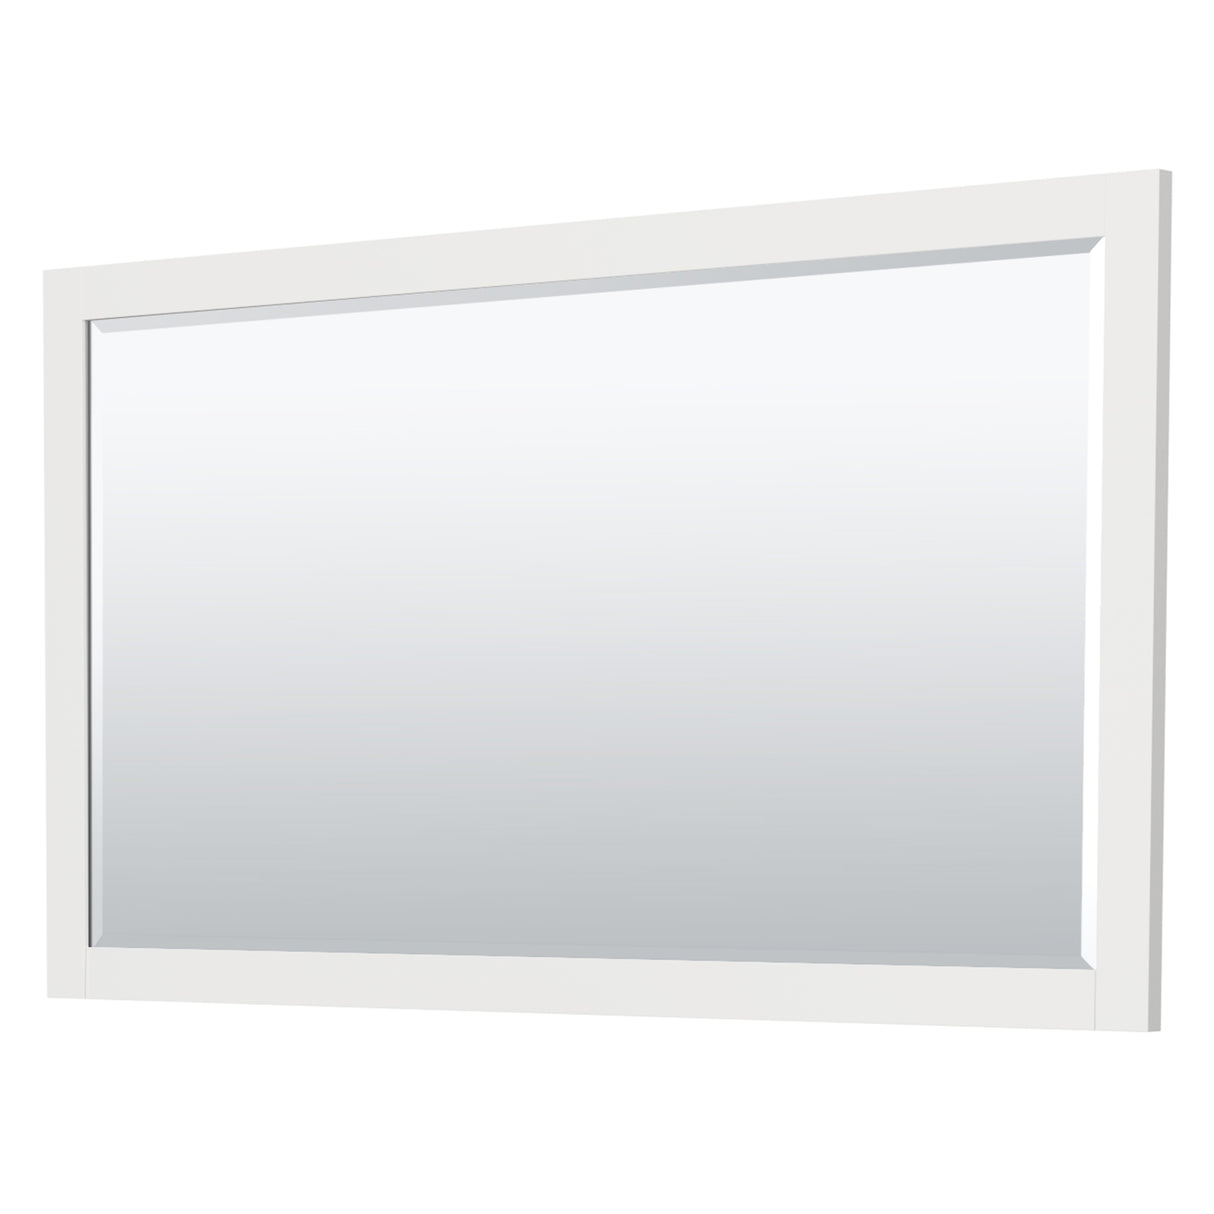 Miranda 66 Inch Double Bathroom Vanity in White White Cultured Marble Countertop Undermount Square Sinks Brushed Nickel Trim 58 Inch Mirror